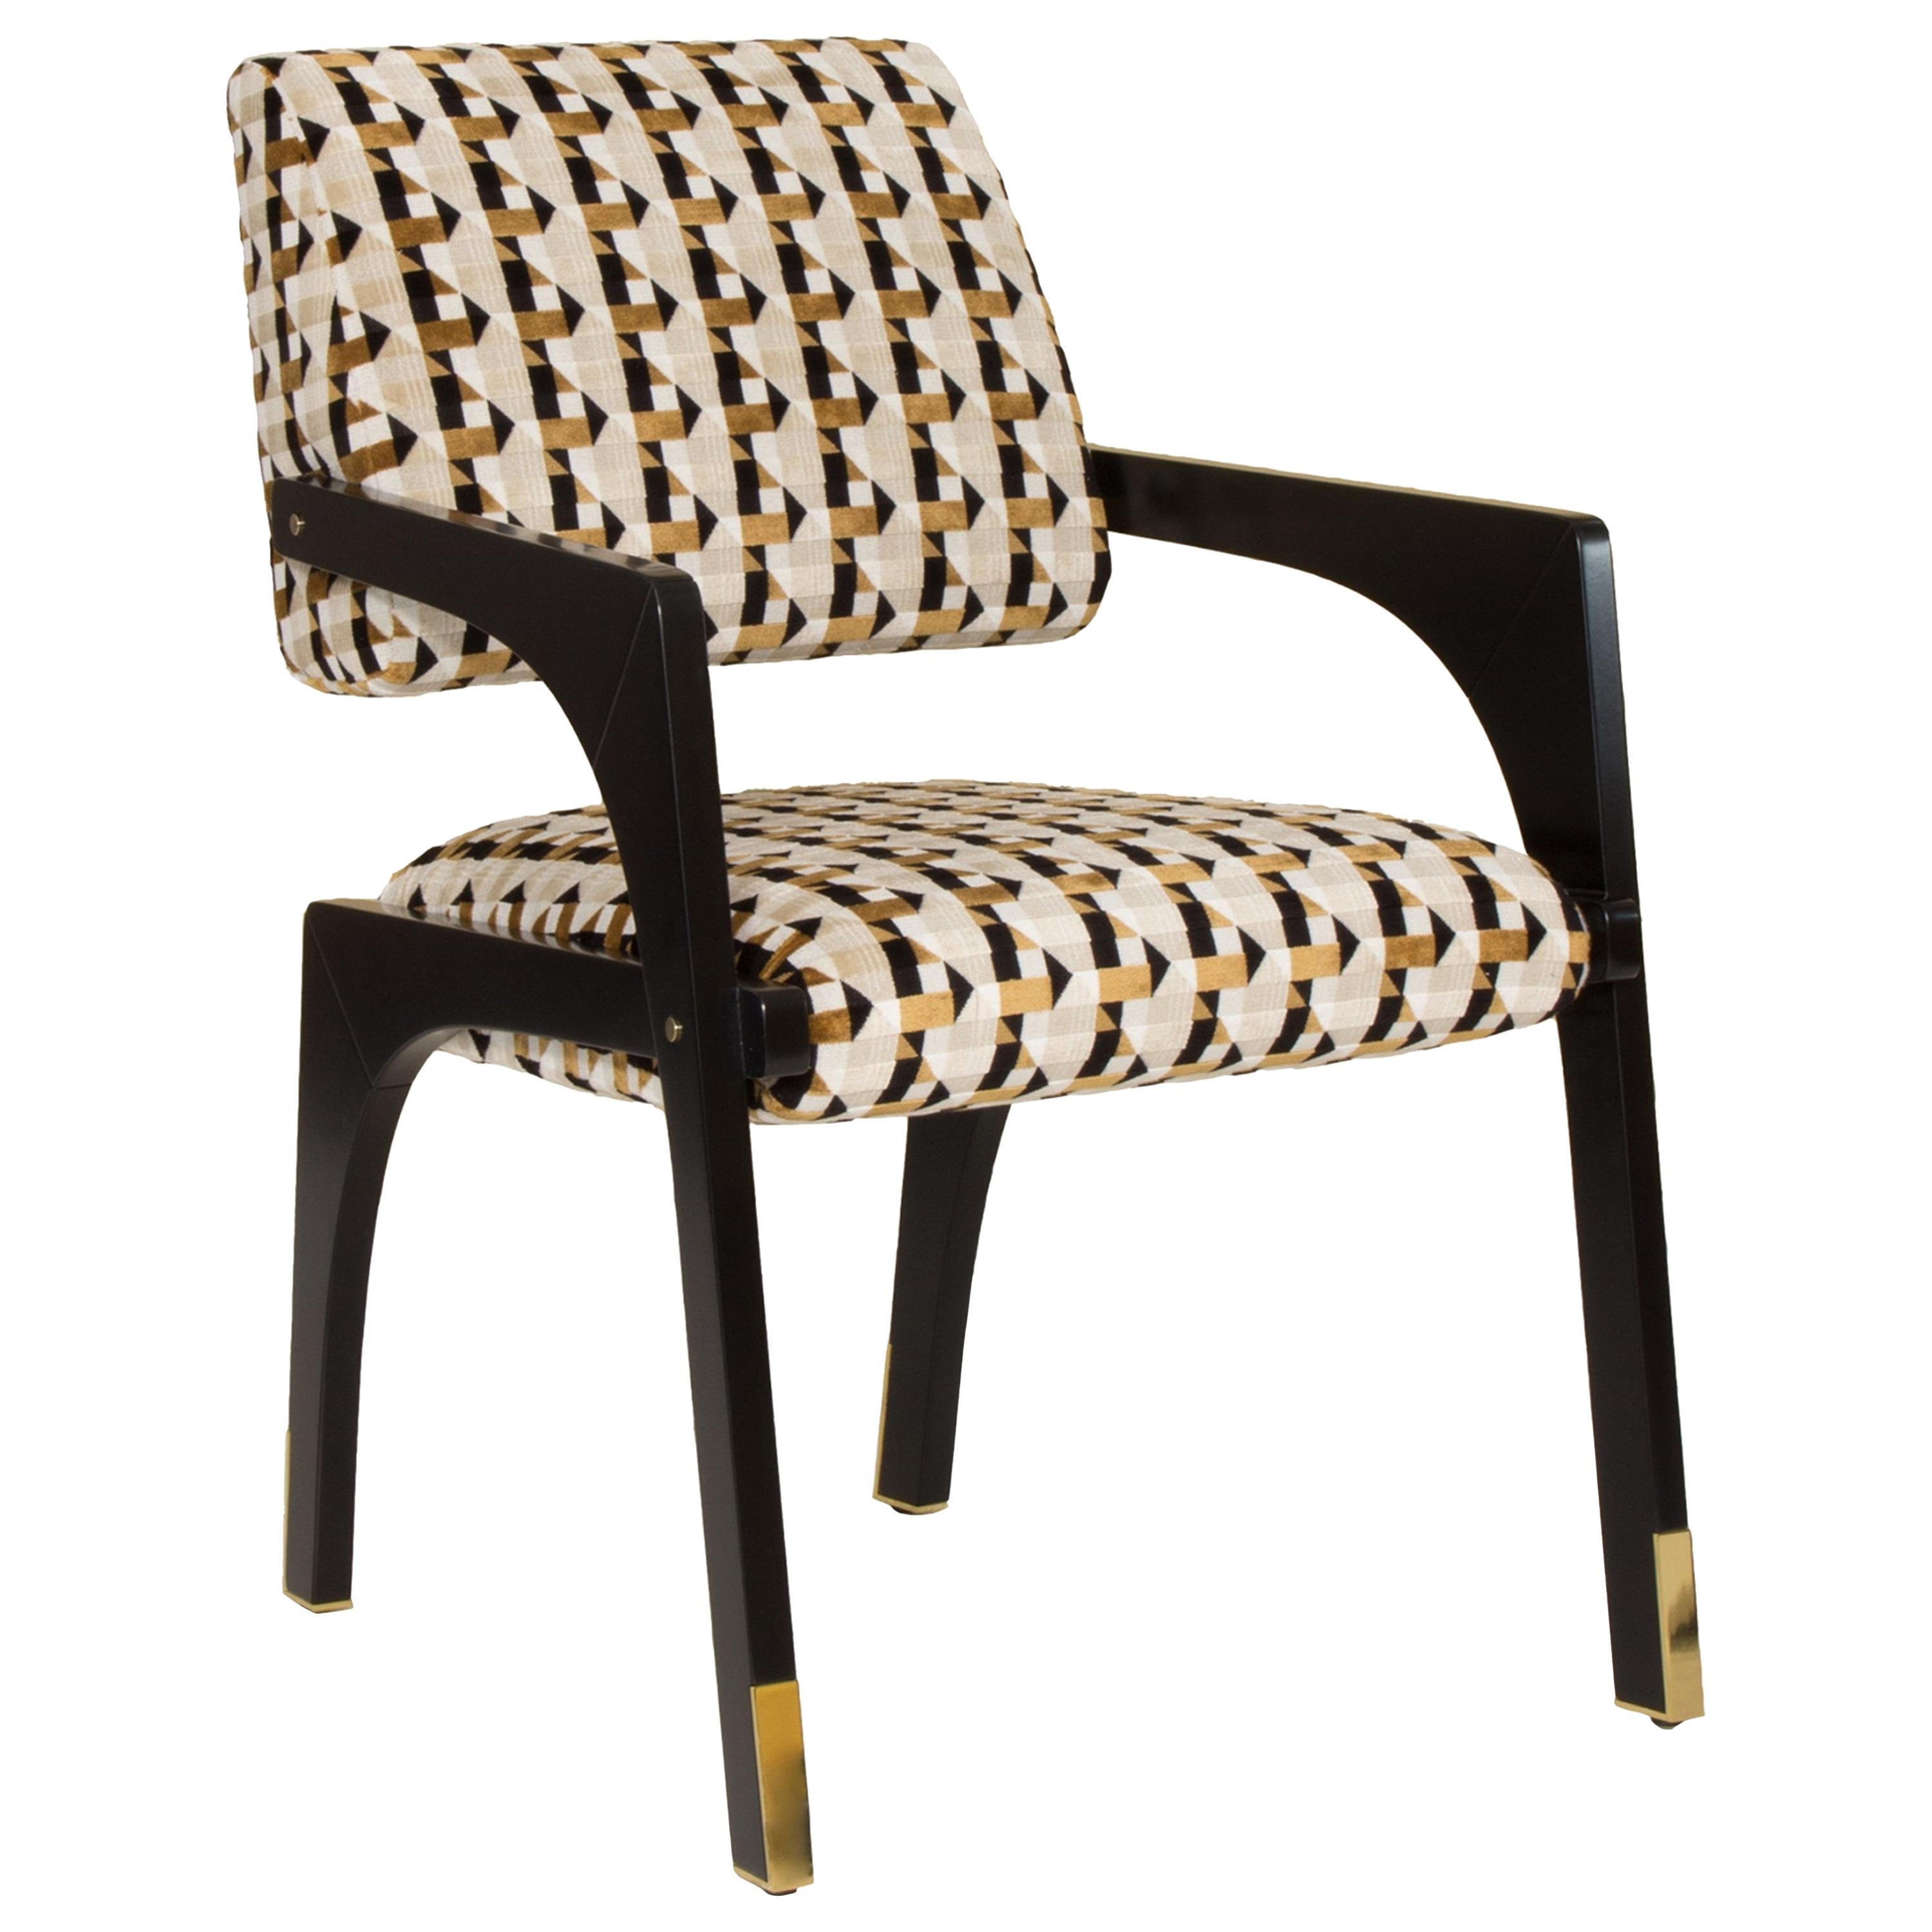 Arches Dining Chair, Twist and Brass, InsidherLand by Joana Santos Barbosa